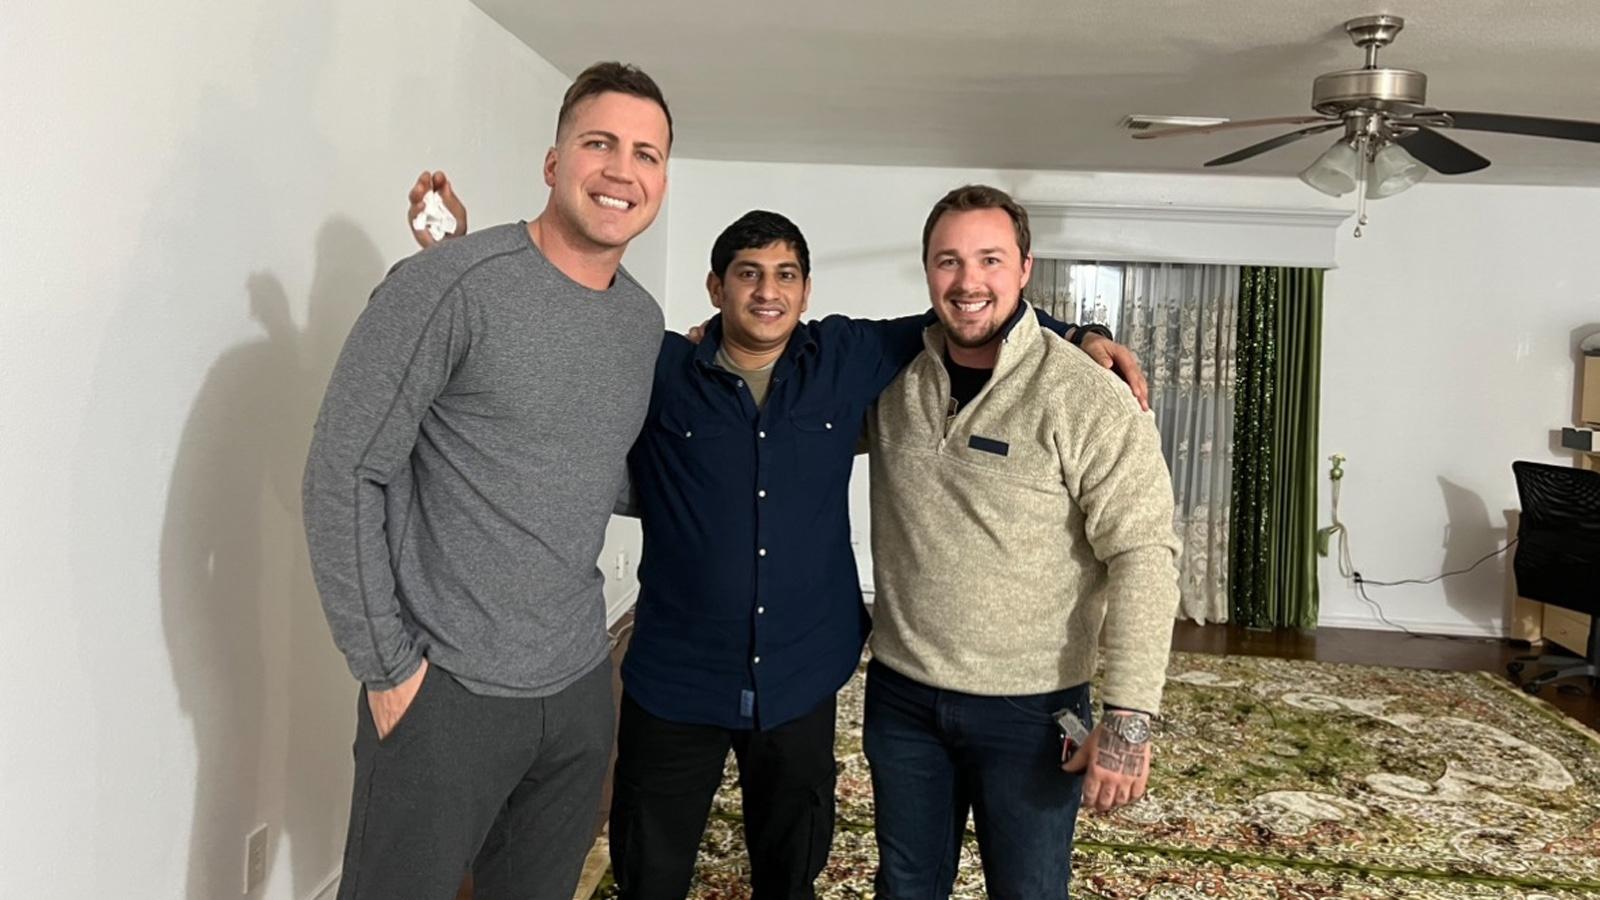 Maj. Tom Schueman, left, and Travis Haggerty, right, are trying to help Zainullah Zaki stay in the United States. (Courtesy of Travis Haggerty)